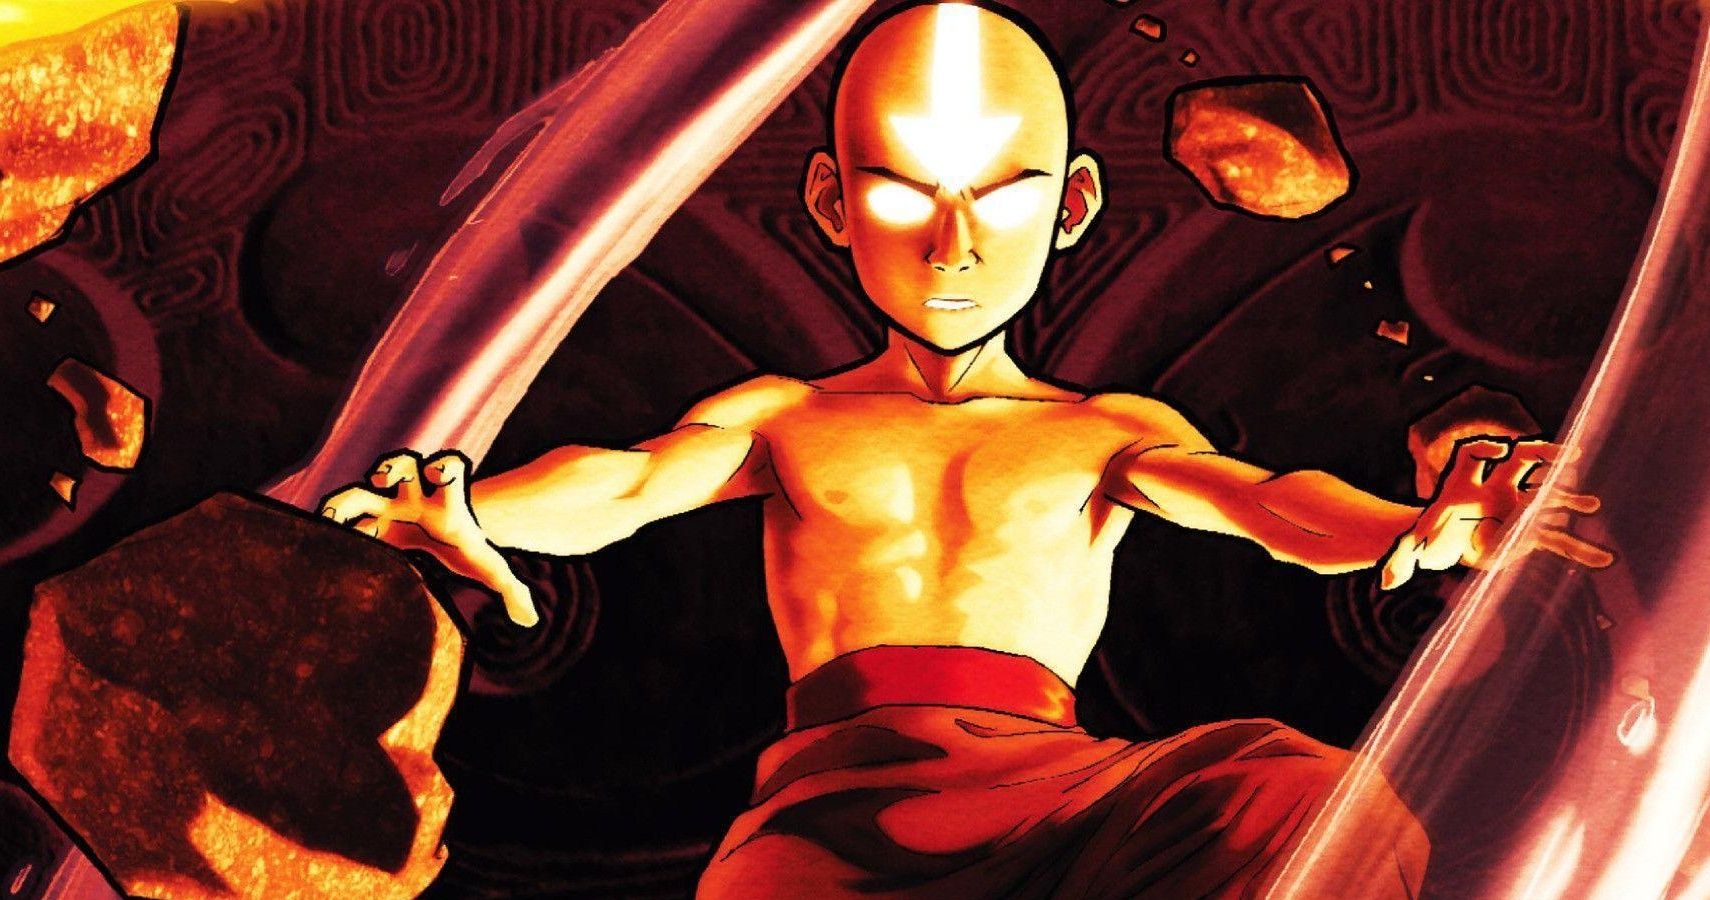 Avatar The Last Airbender: How To Make Aang In Dungeons & Dragons